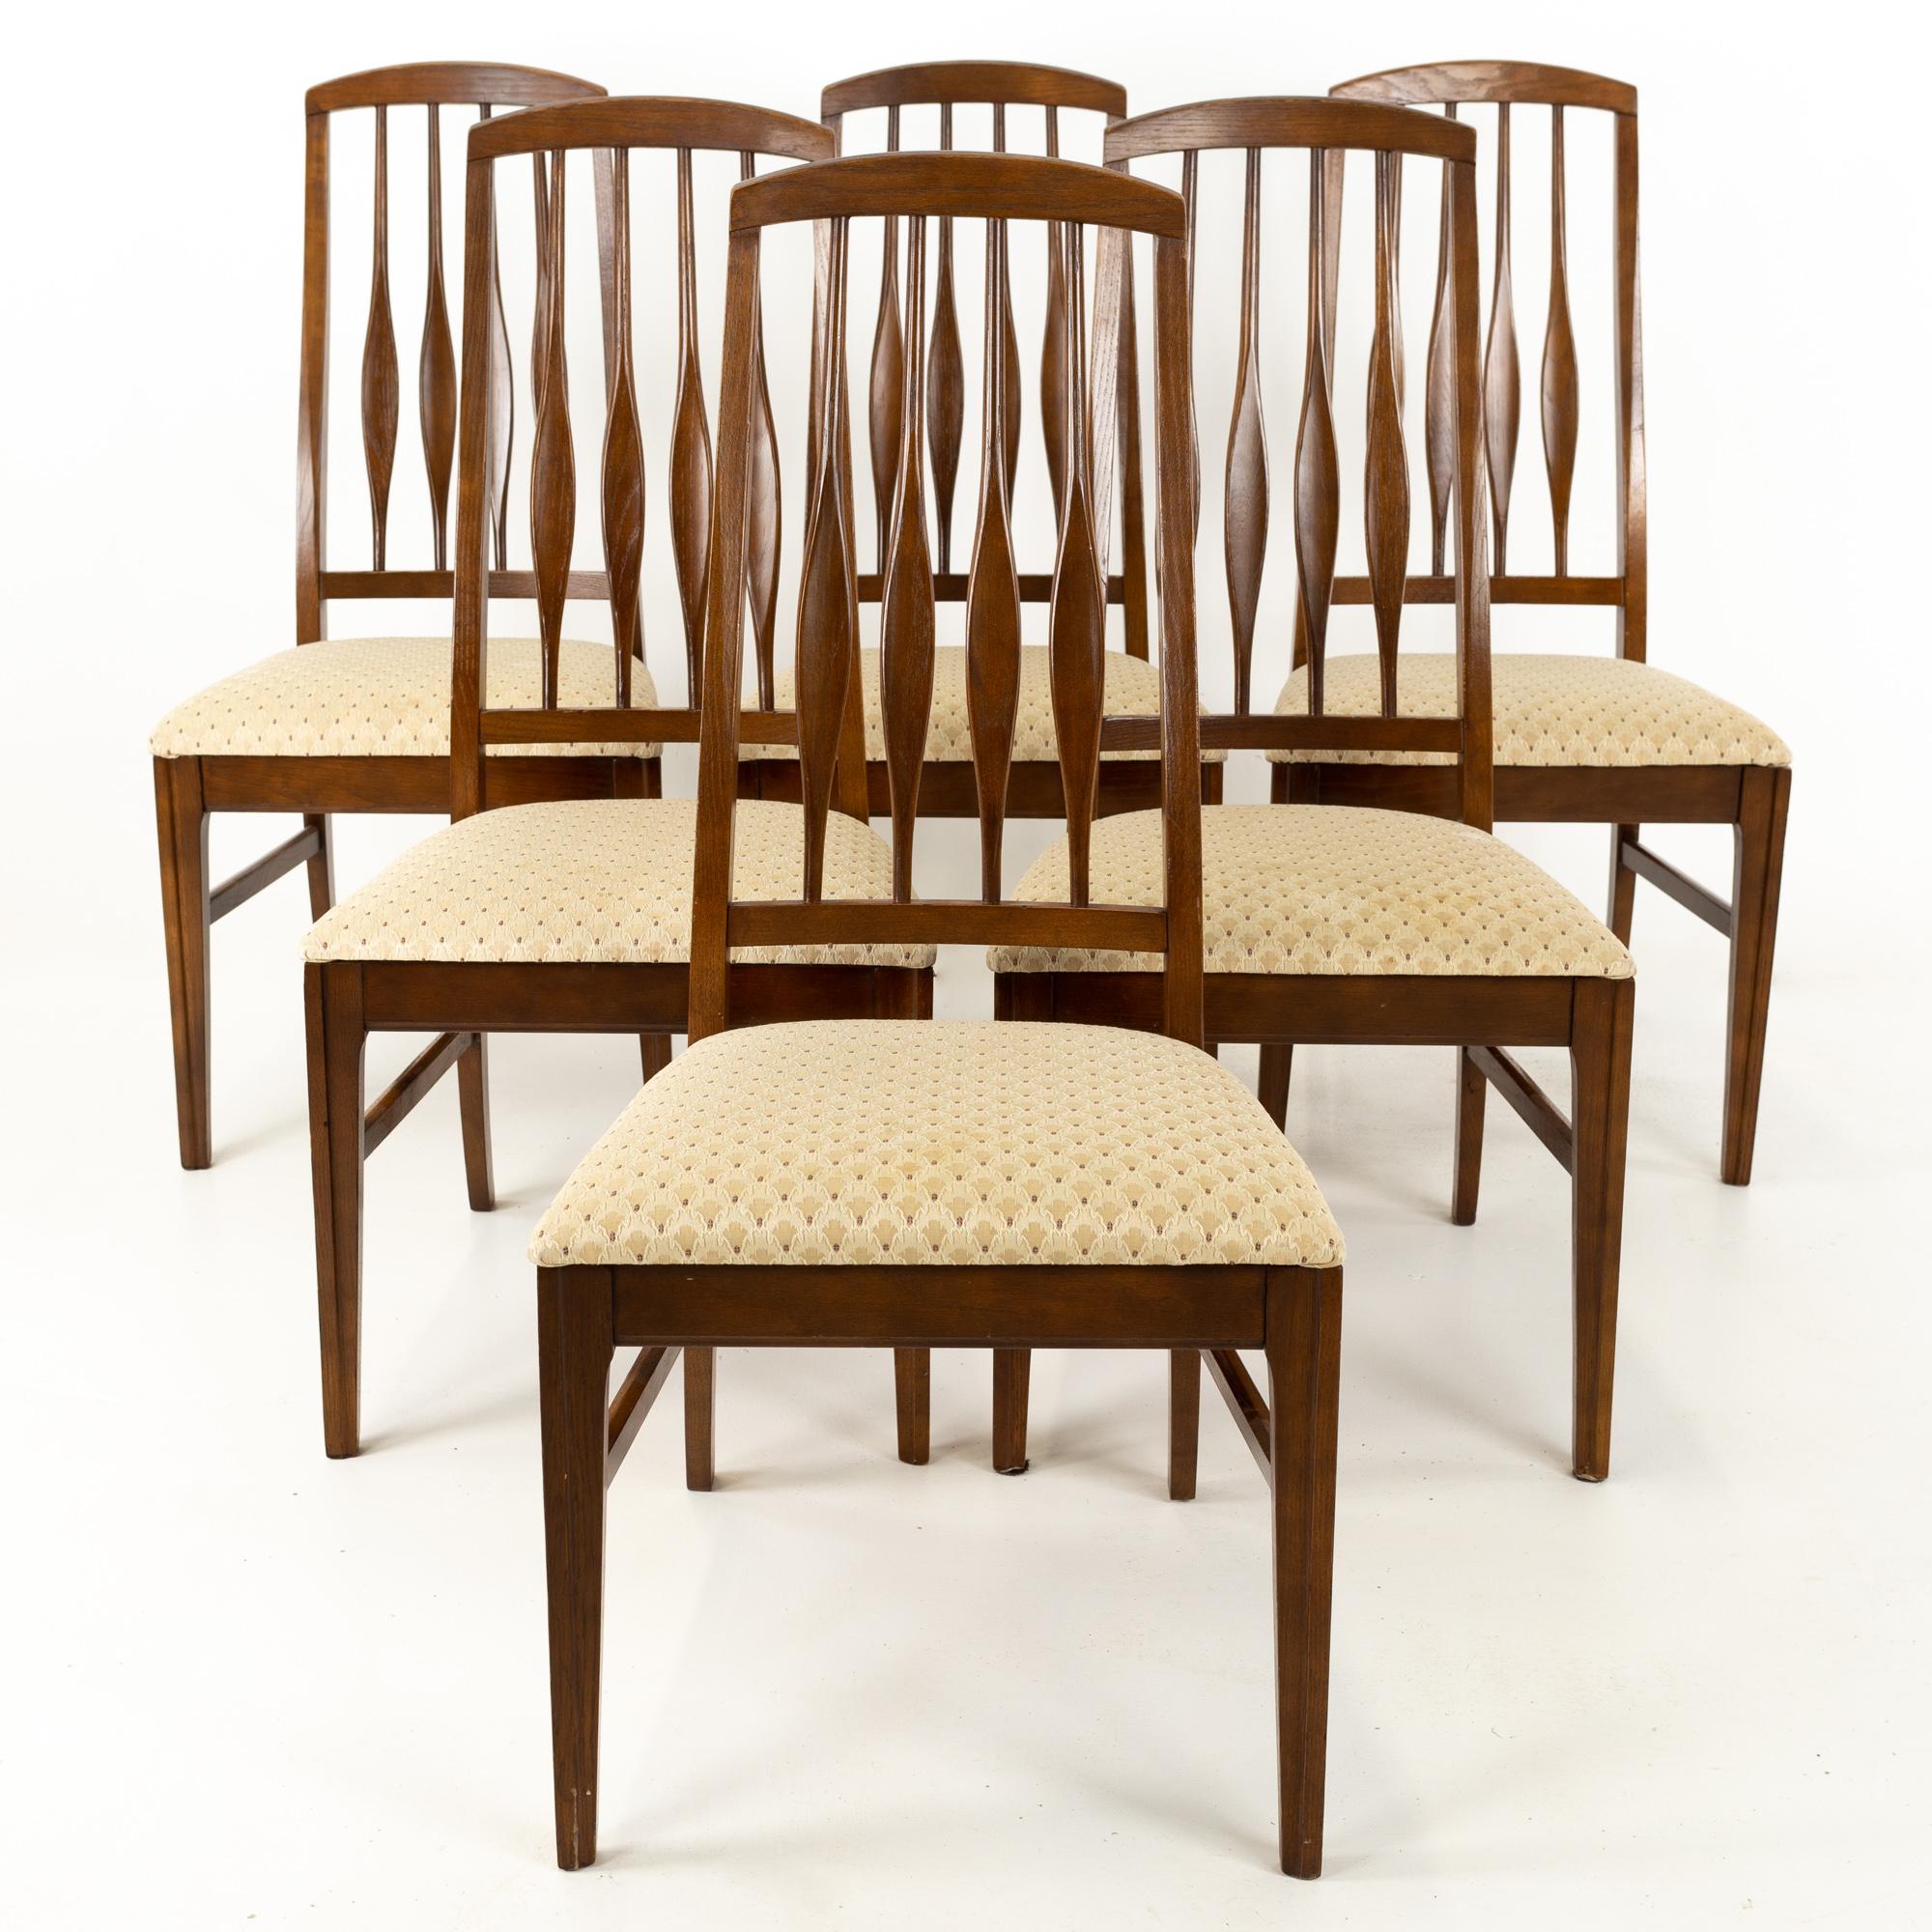 Koefoeds Hornslet Eva style Keller Mid Century walnut dining chairs, set of 6
These chairs are 19 wide x 22 deep x 40.25 inches high, with a seat height of 18.25 inches

All pieces of furniture can be had in what we call restored vintage condition.